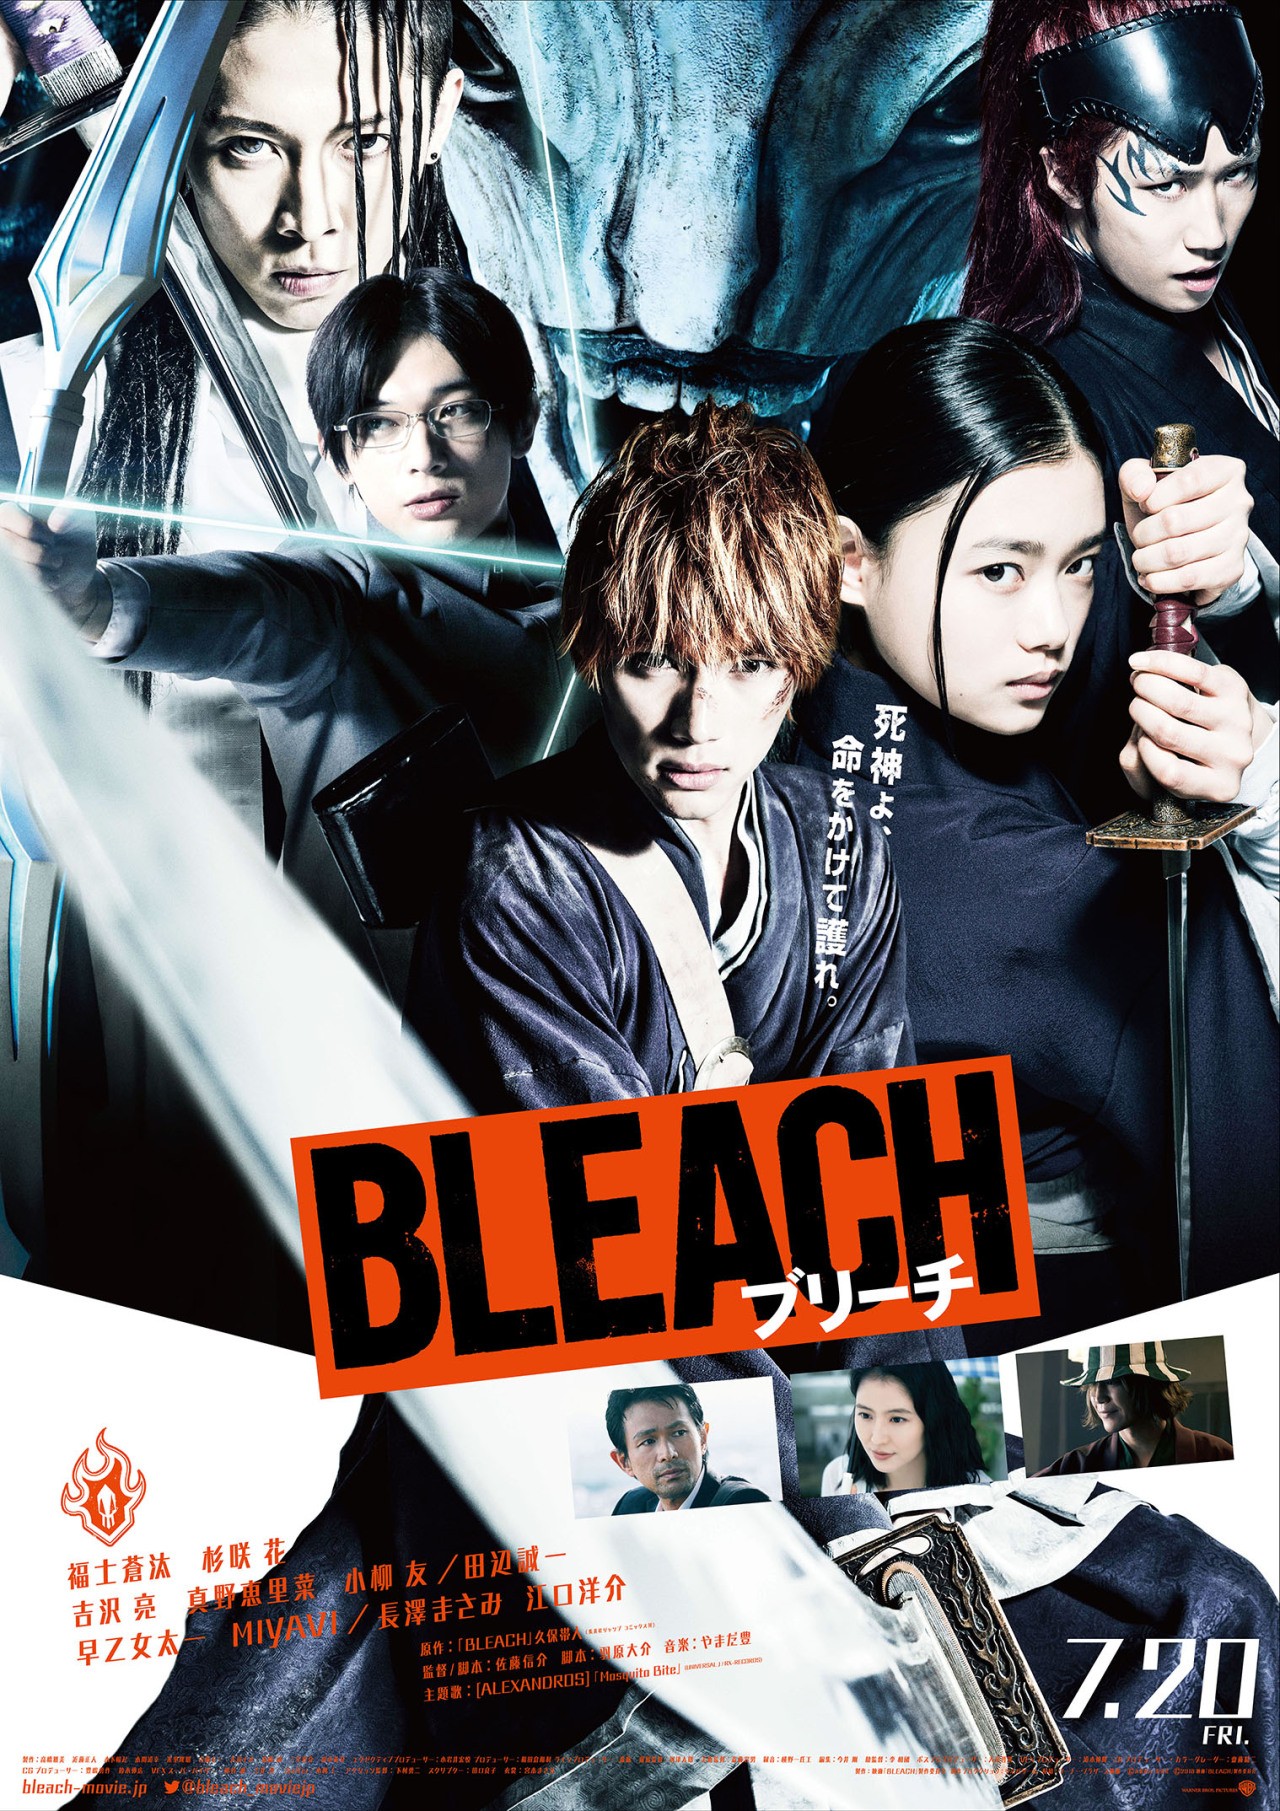 Bleach: Top 10 Episodes According To IMBD – Nen Culture